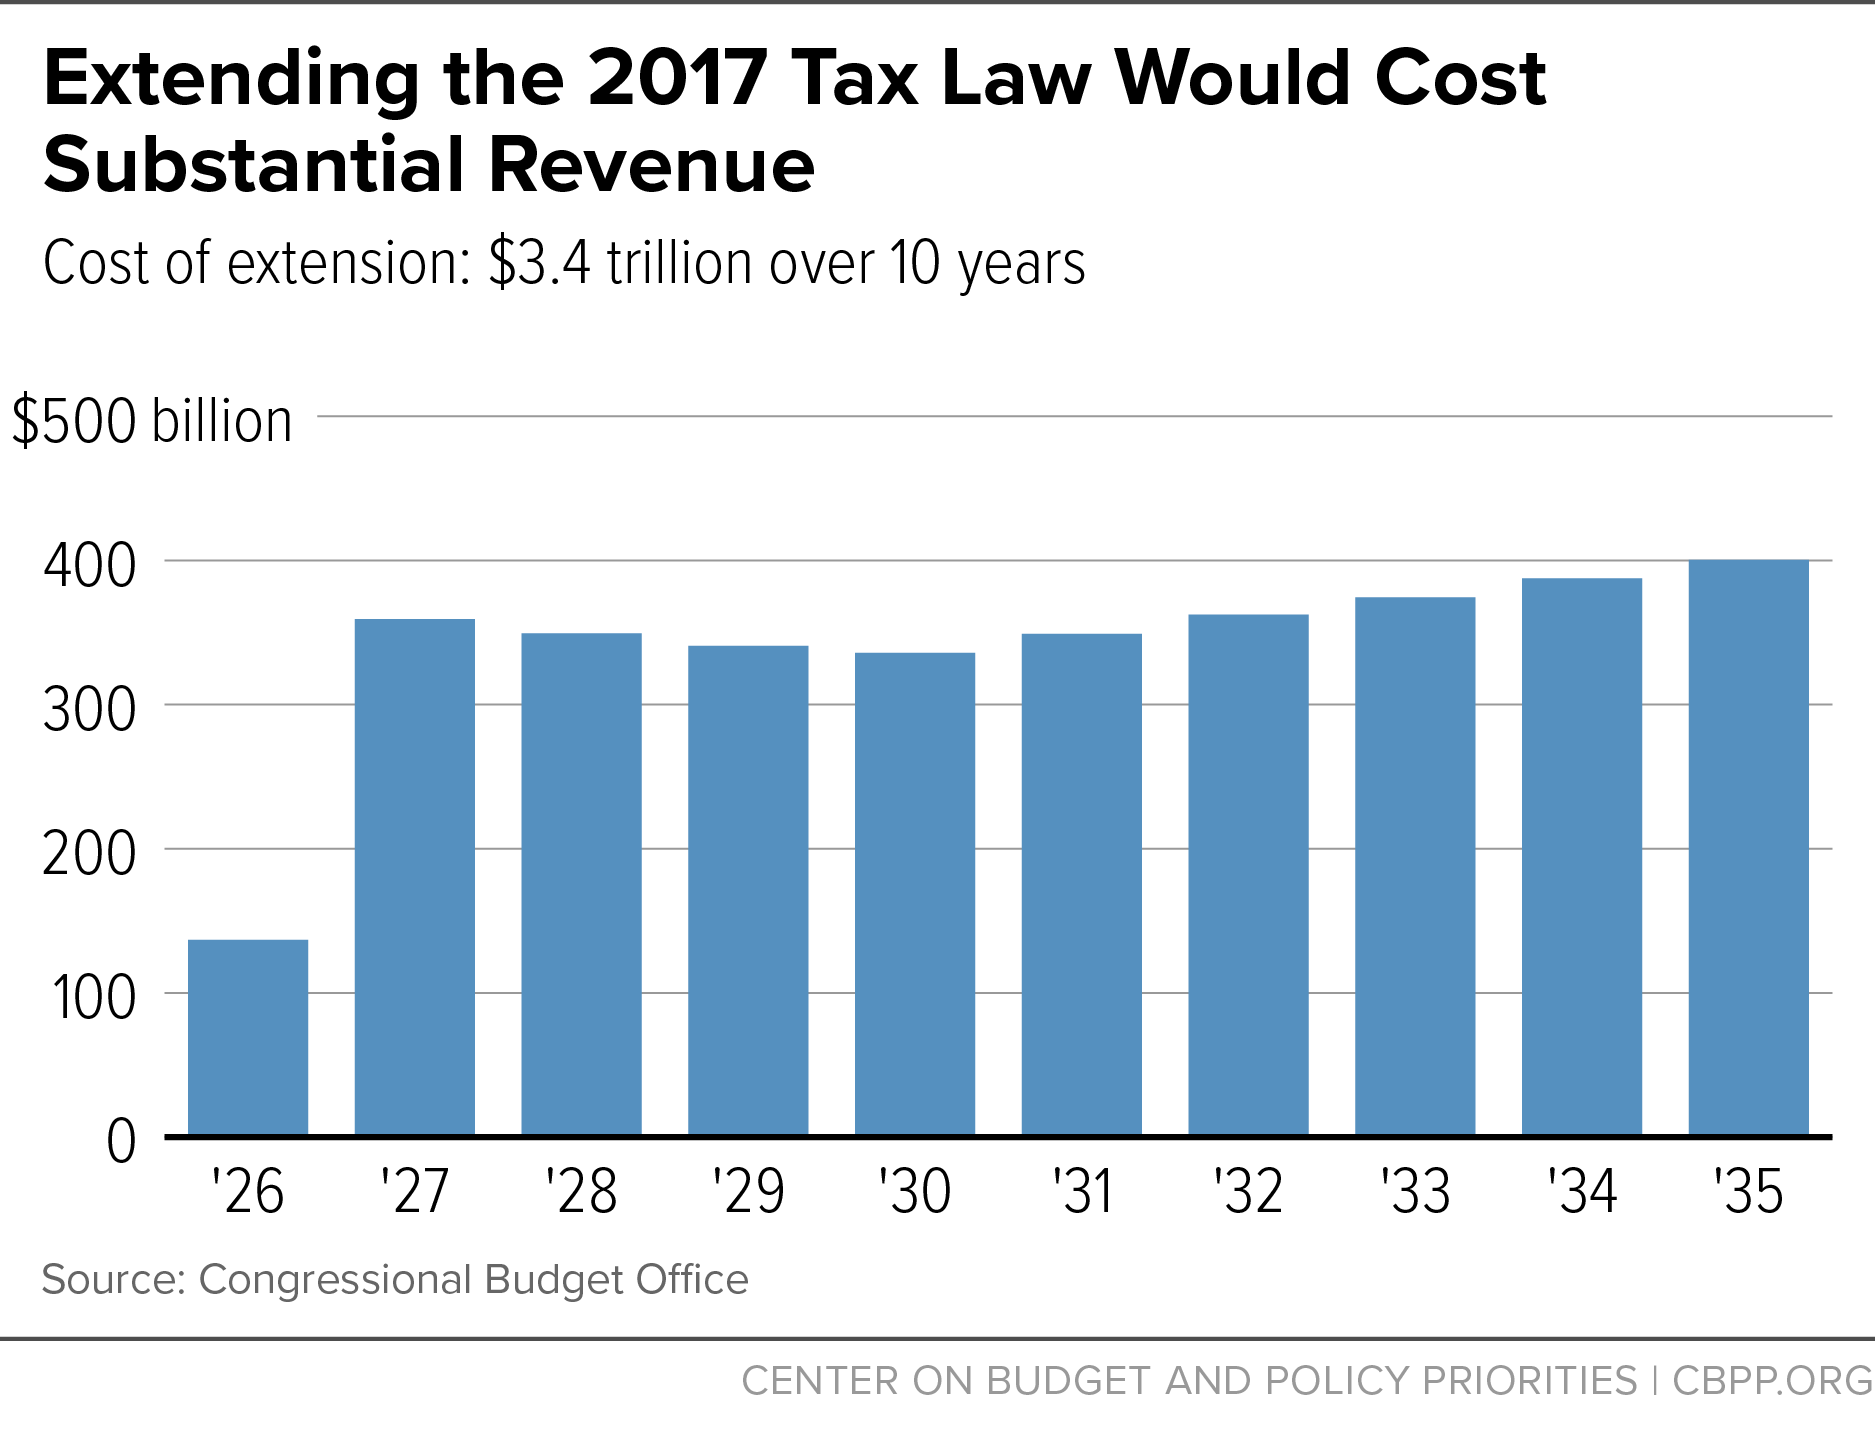 Extending the 2017 Tax Law Would Cost Substantial Revenue